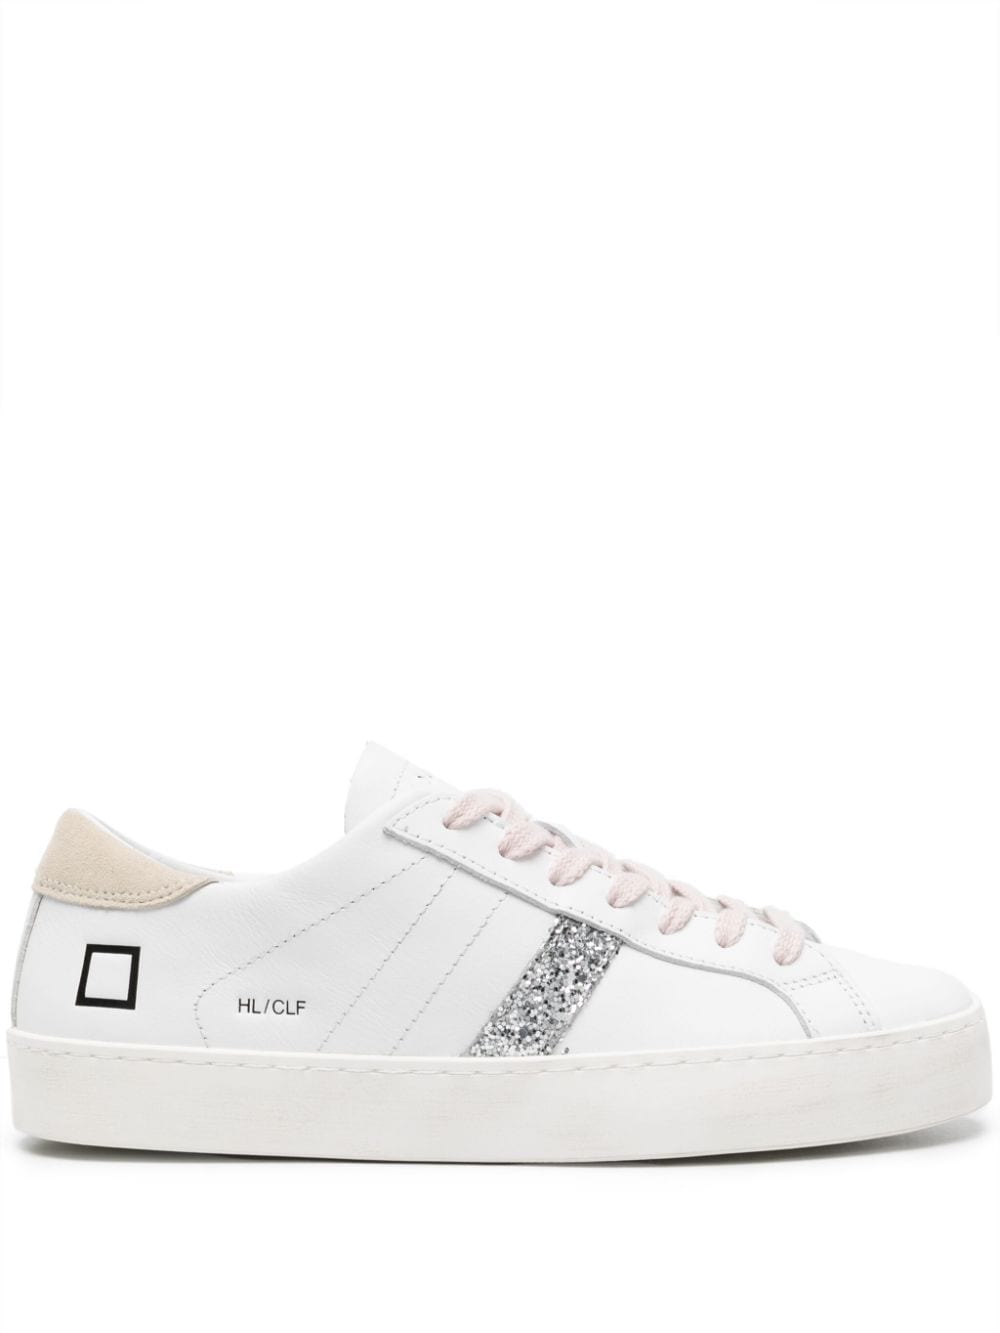 Date Hill Leather Sneakers In White